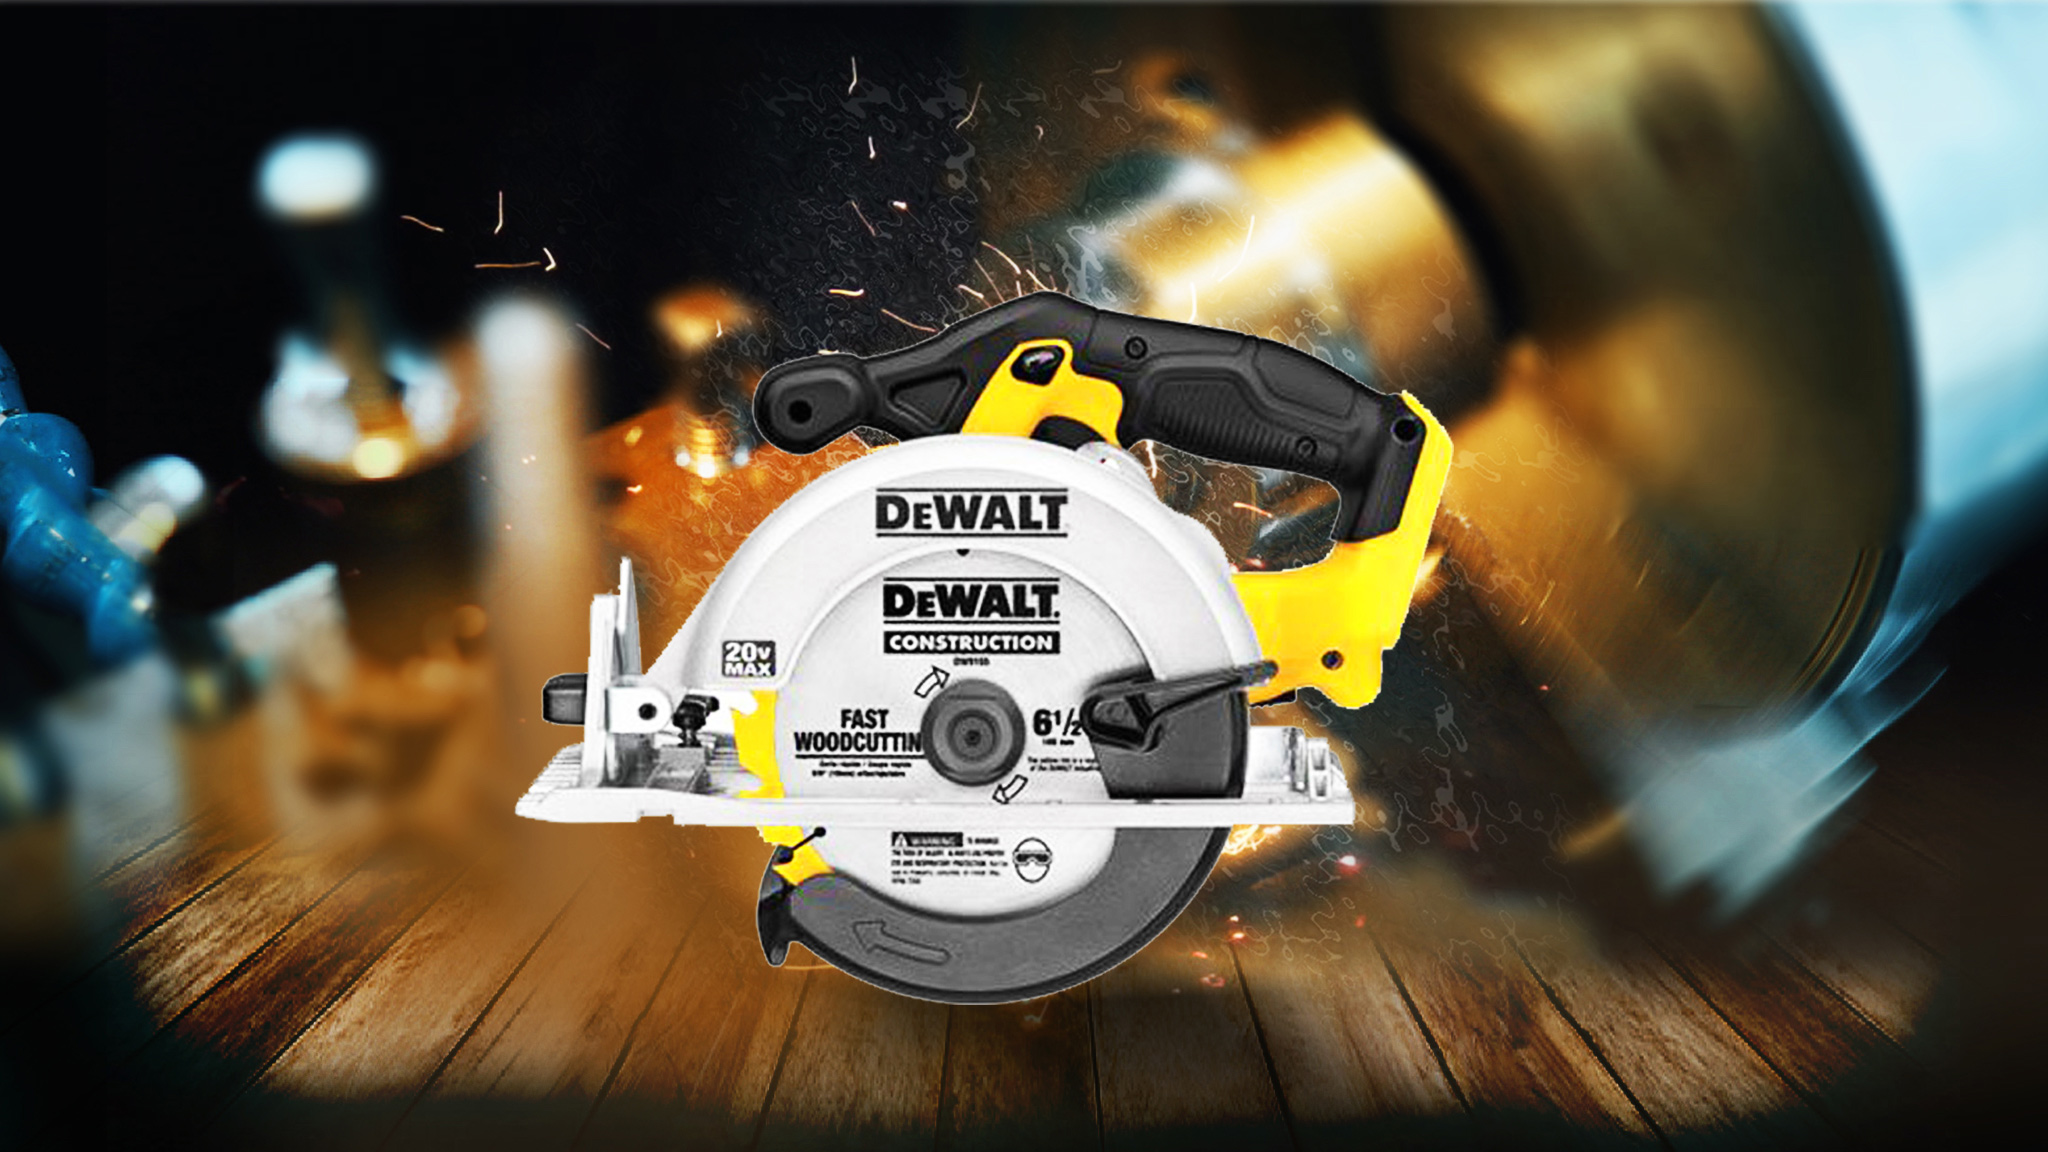 Droogte waterval basketbal Dewalt DCS391 Review for DIY Pros Looking for A Circular Saw | Drillly